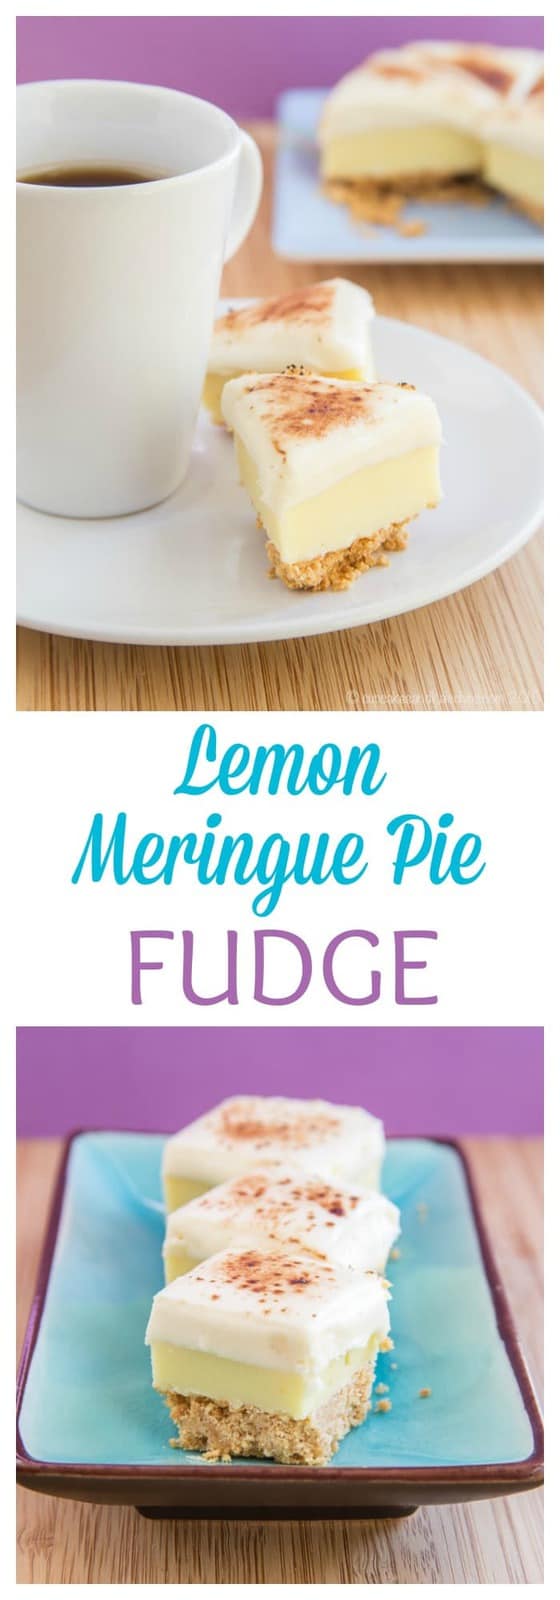 Lemon Meringue Pie Fudge - buttery crust, lemony white chocolate fudge, and a marshmallow topping gives you all the pie flavor in a sweet little candy bite | cupcakesandkalechips.com